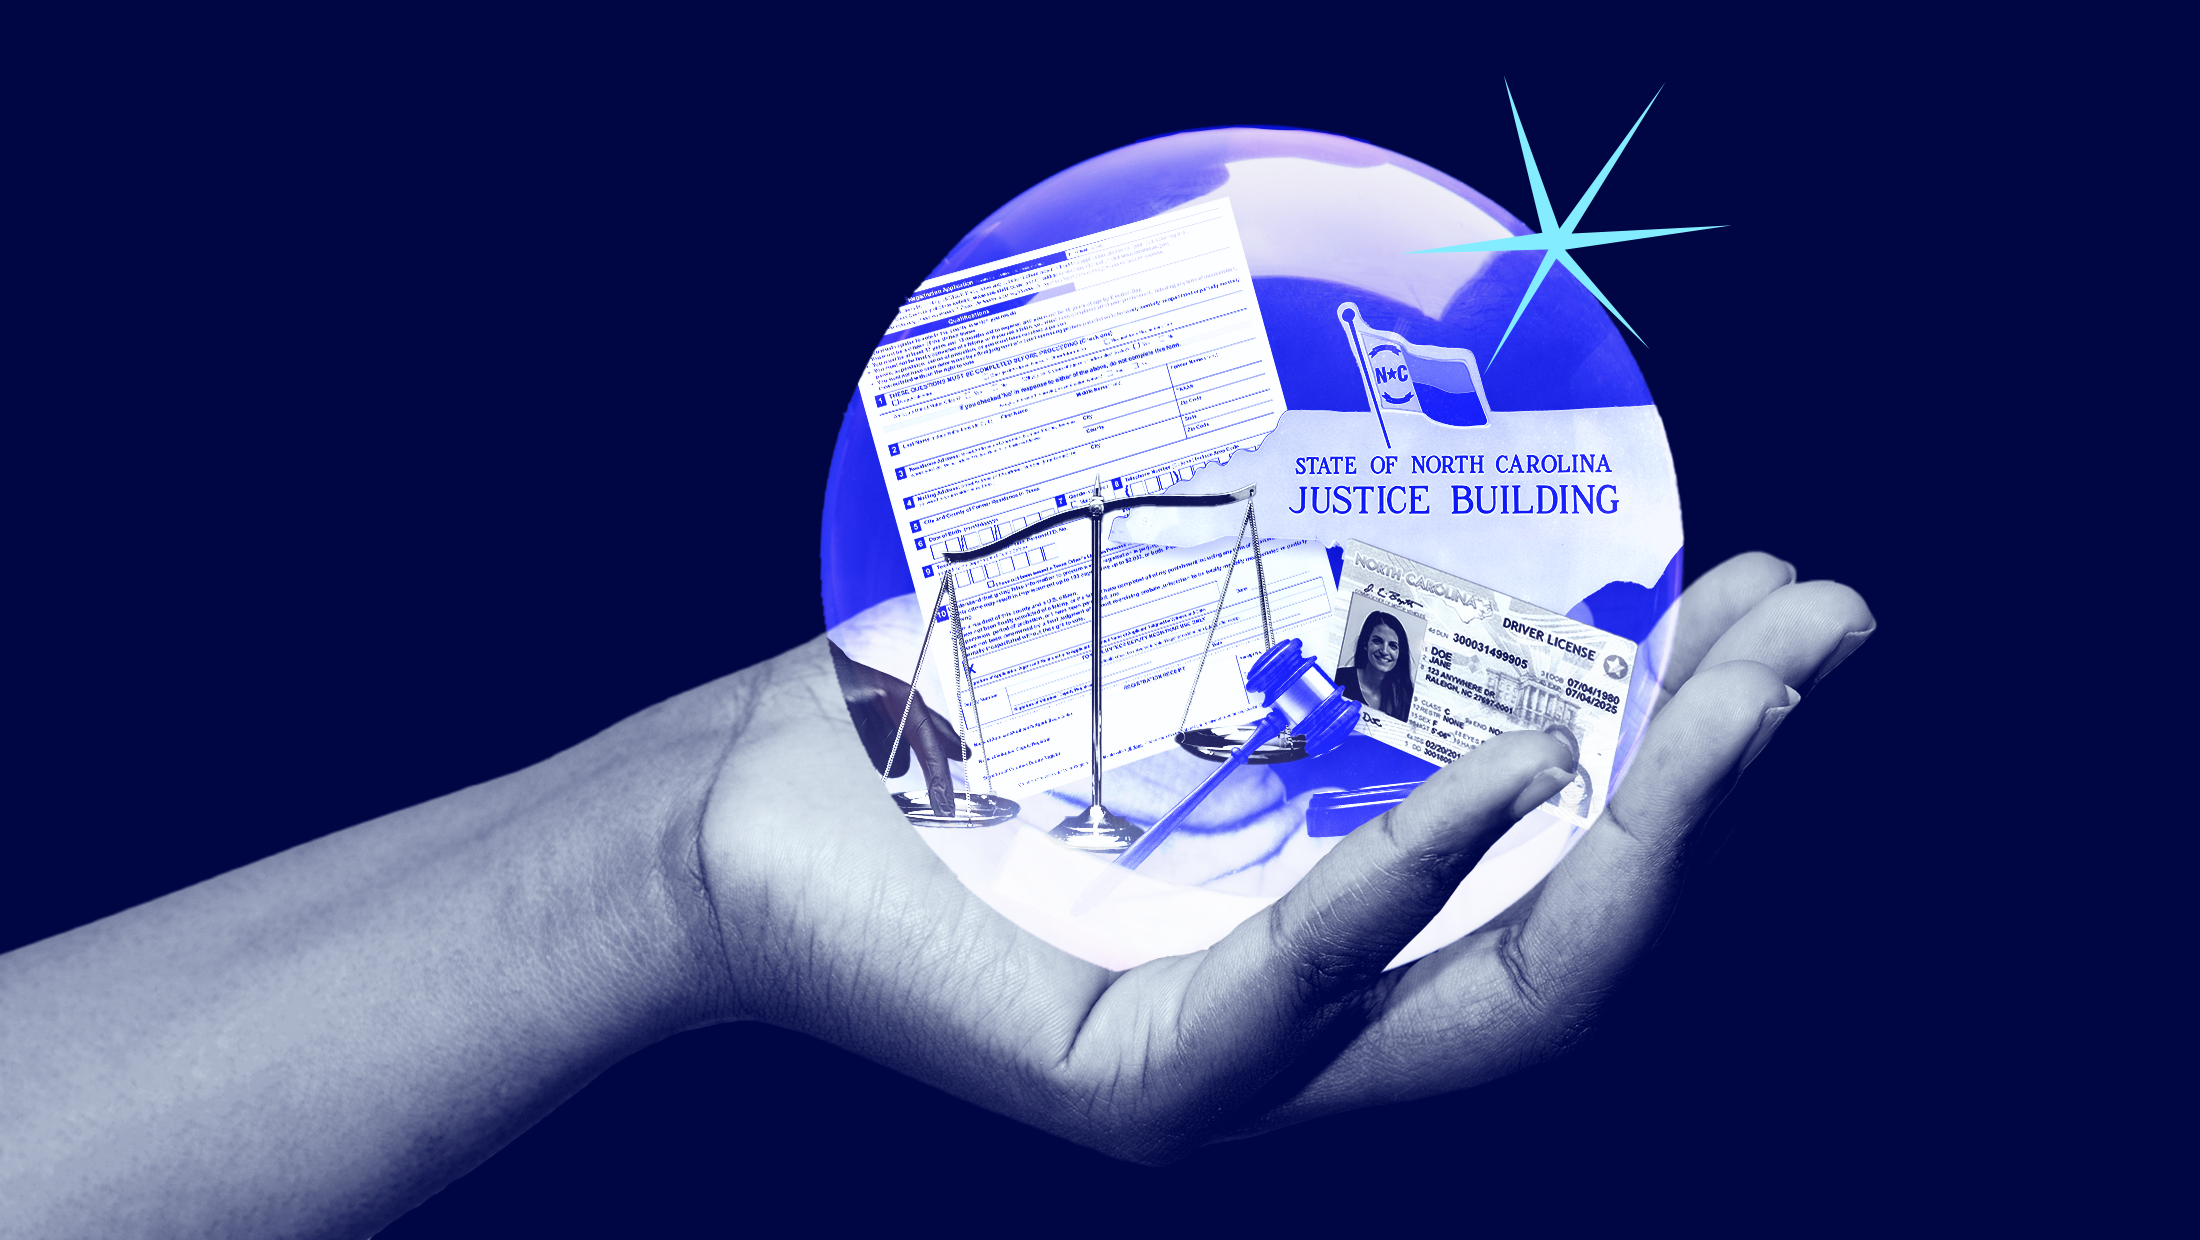 A bright blue background with a hand holding a crystal ball revealing unbalanced scales, a Texas voter registration form, the North Carolina flag, an outline of the state of North Carolina with "State of North Carolina Justice Building" overtop, a North Carolina driver's license and a gavel